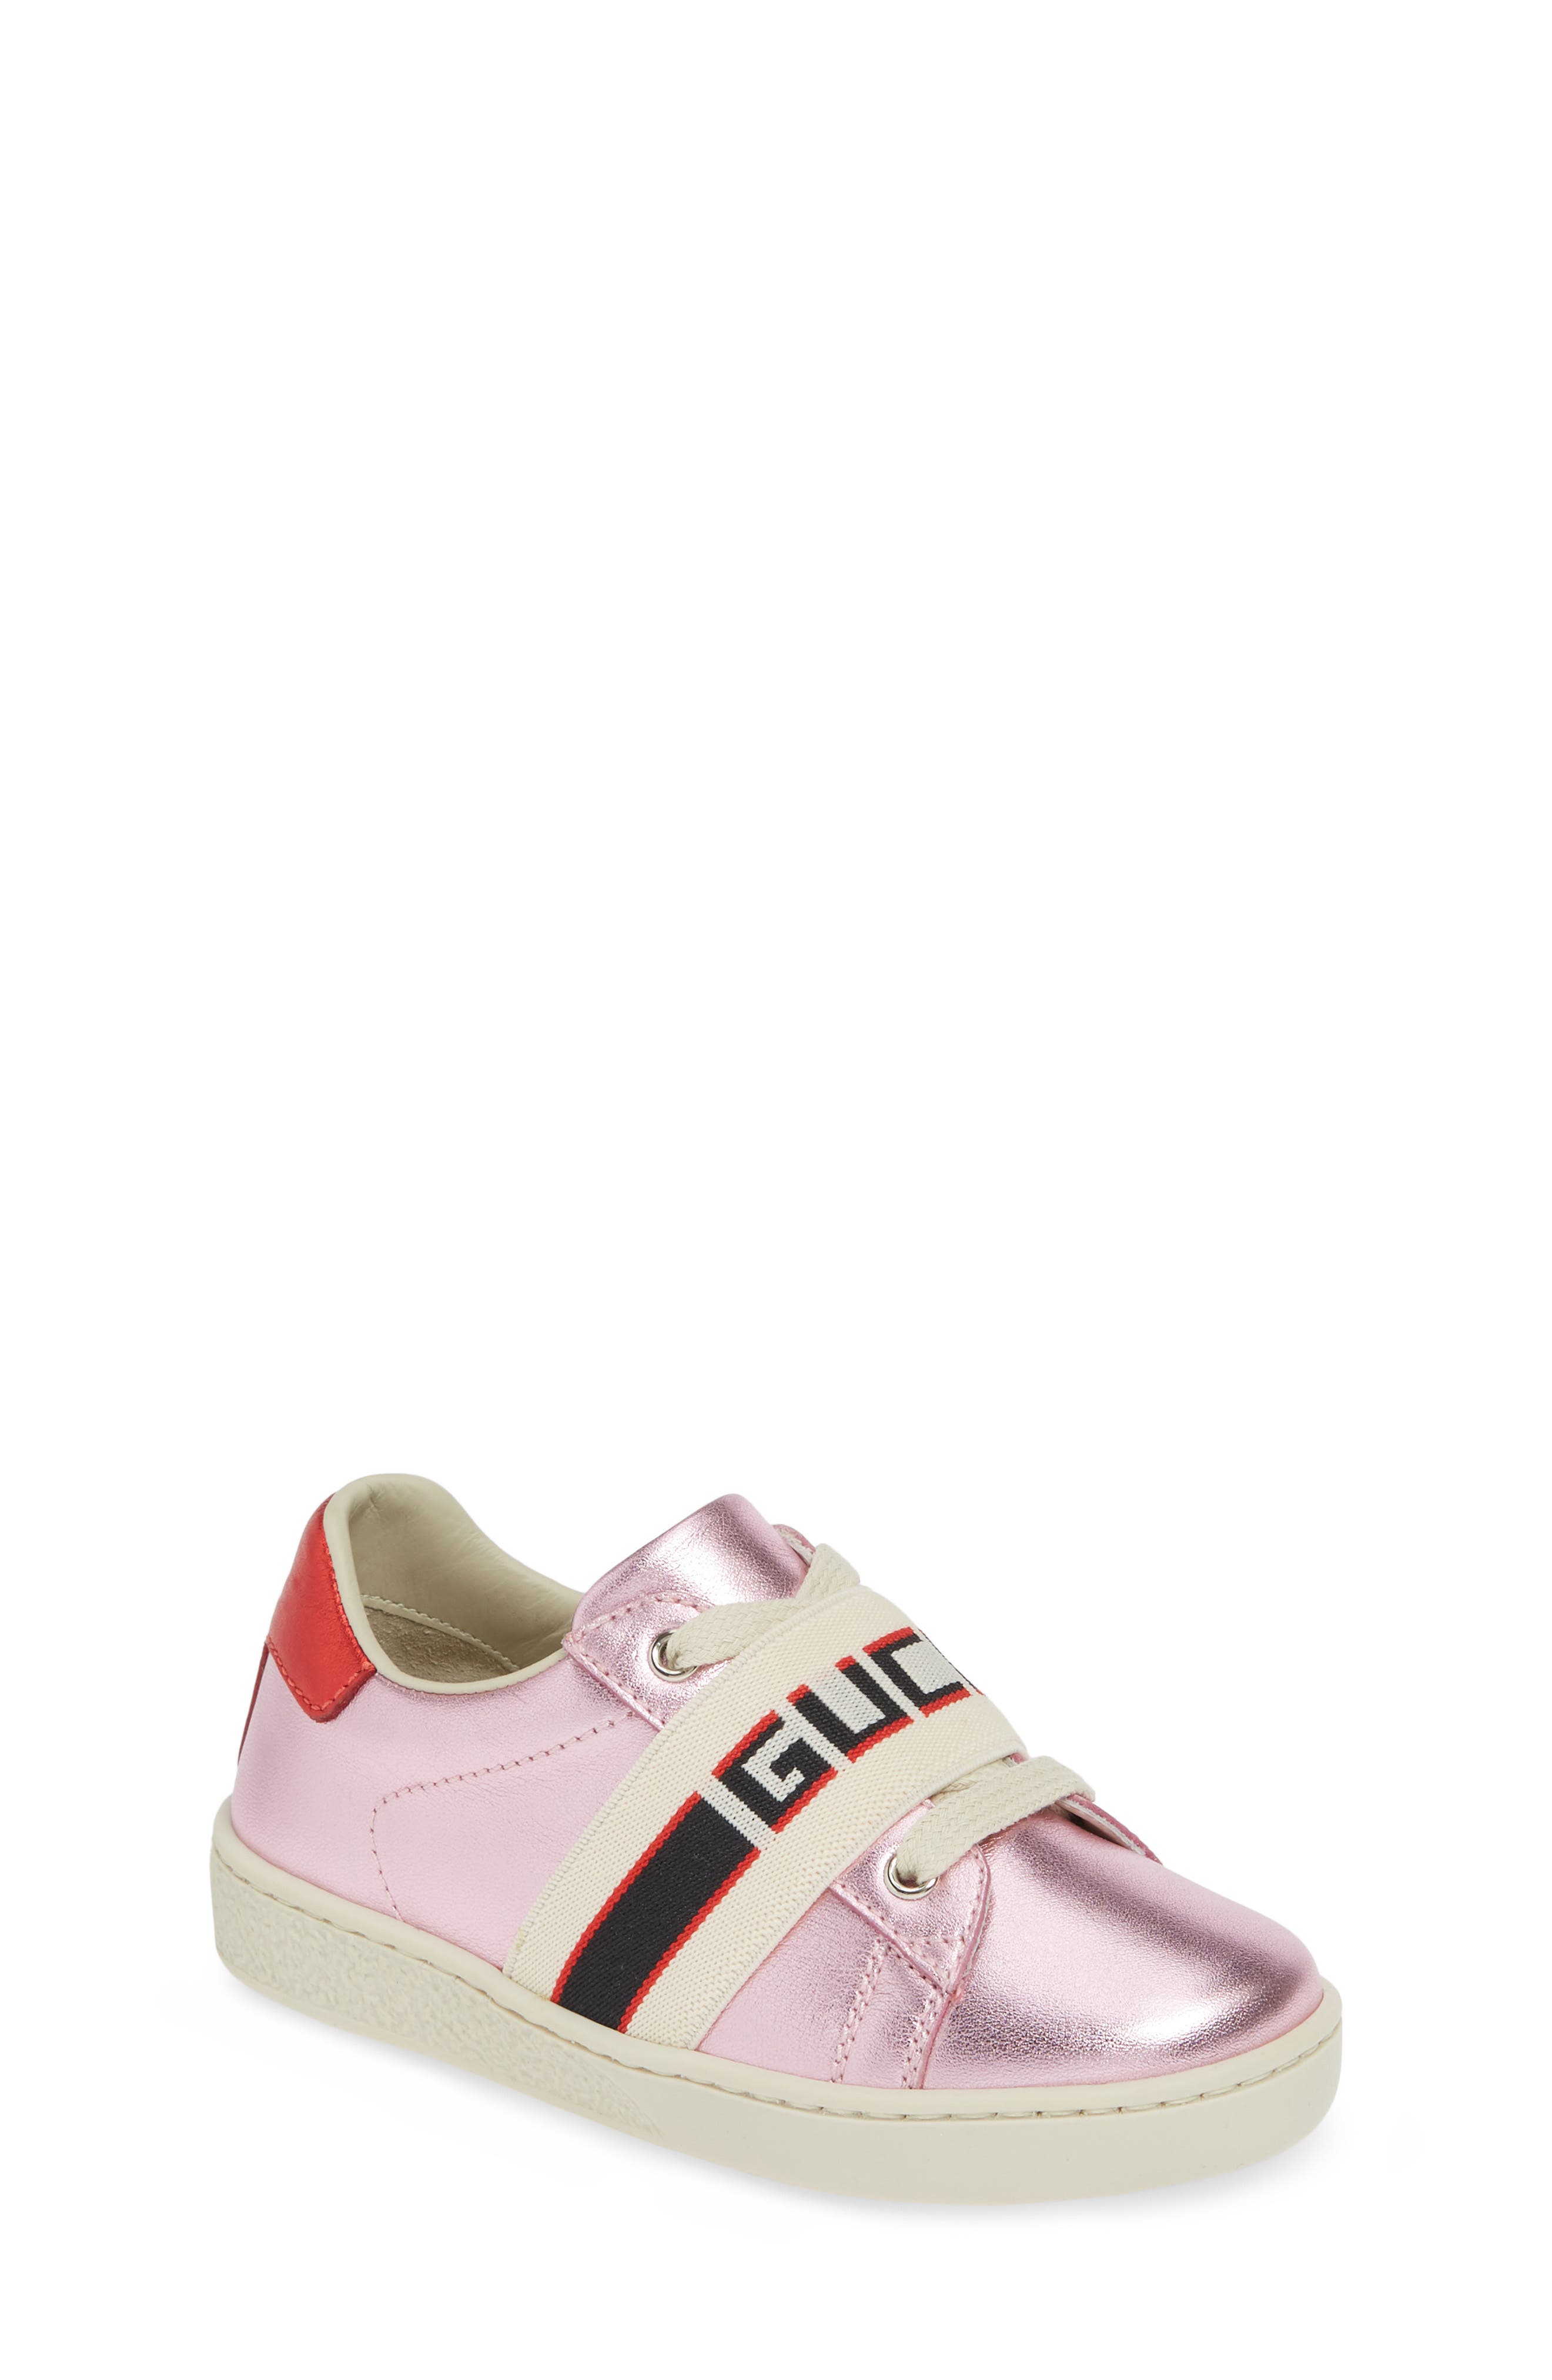 gucci trainers for girls